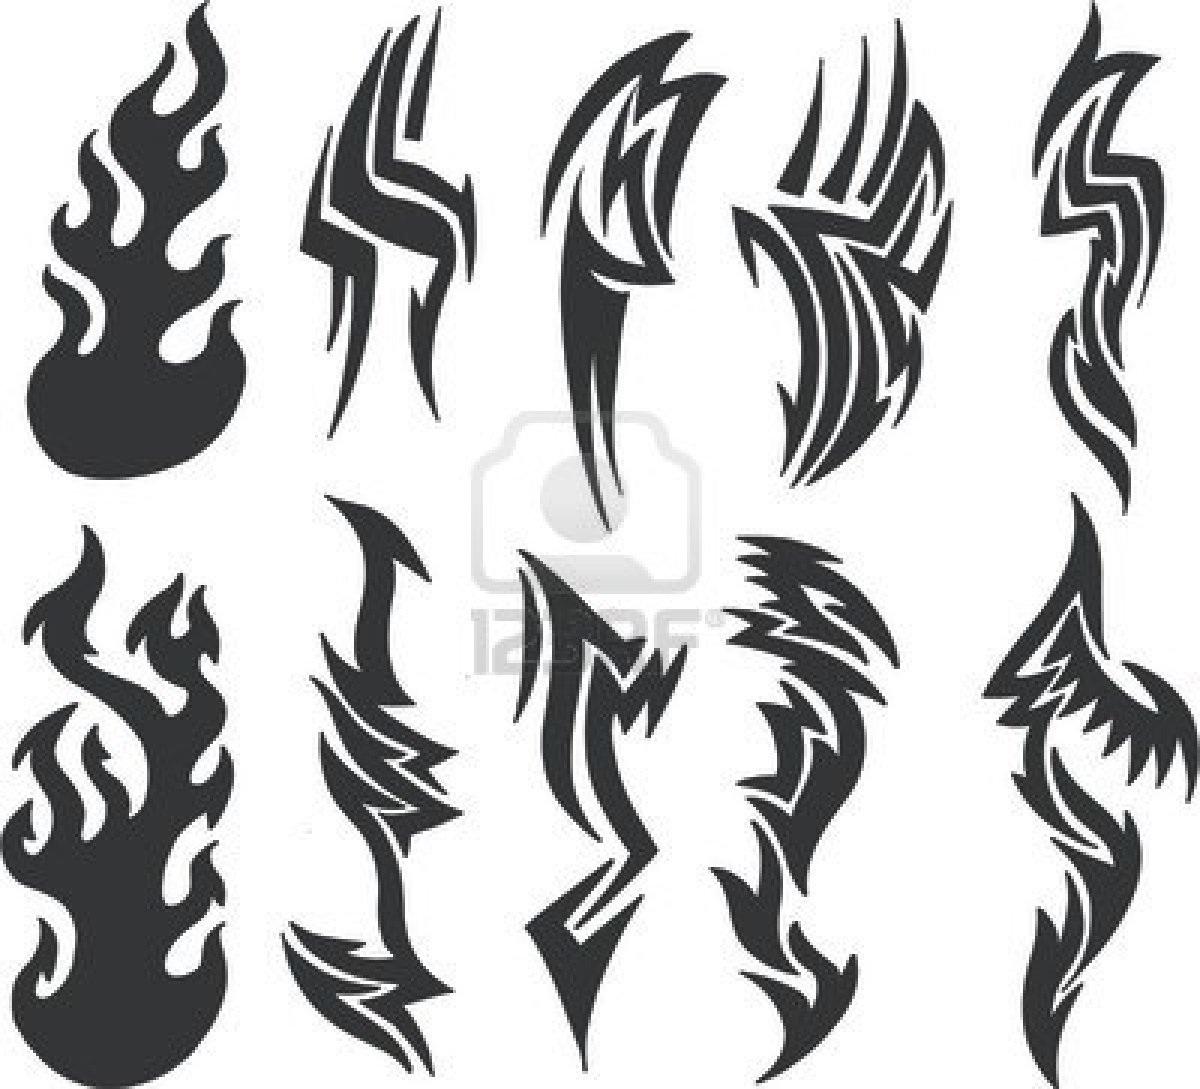 Tribales Vector | Tattoo Photo | tarah10 | Fans Share Images